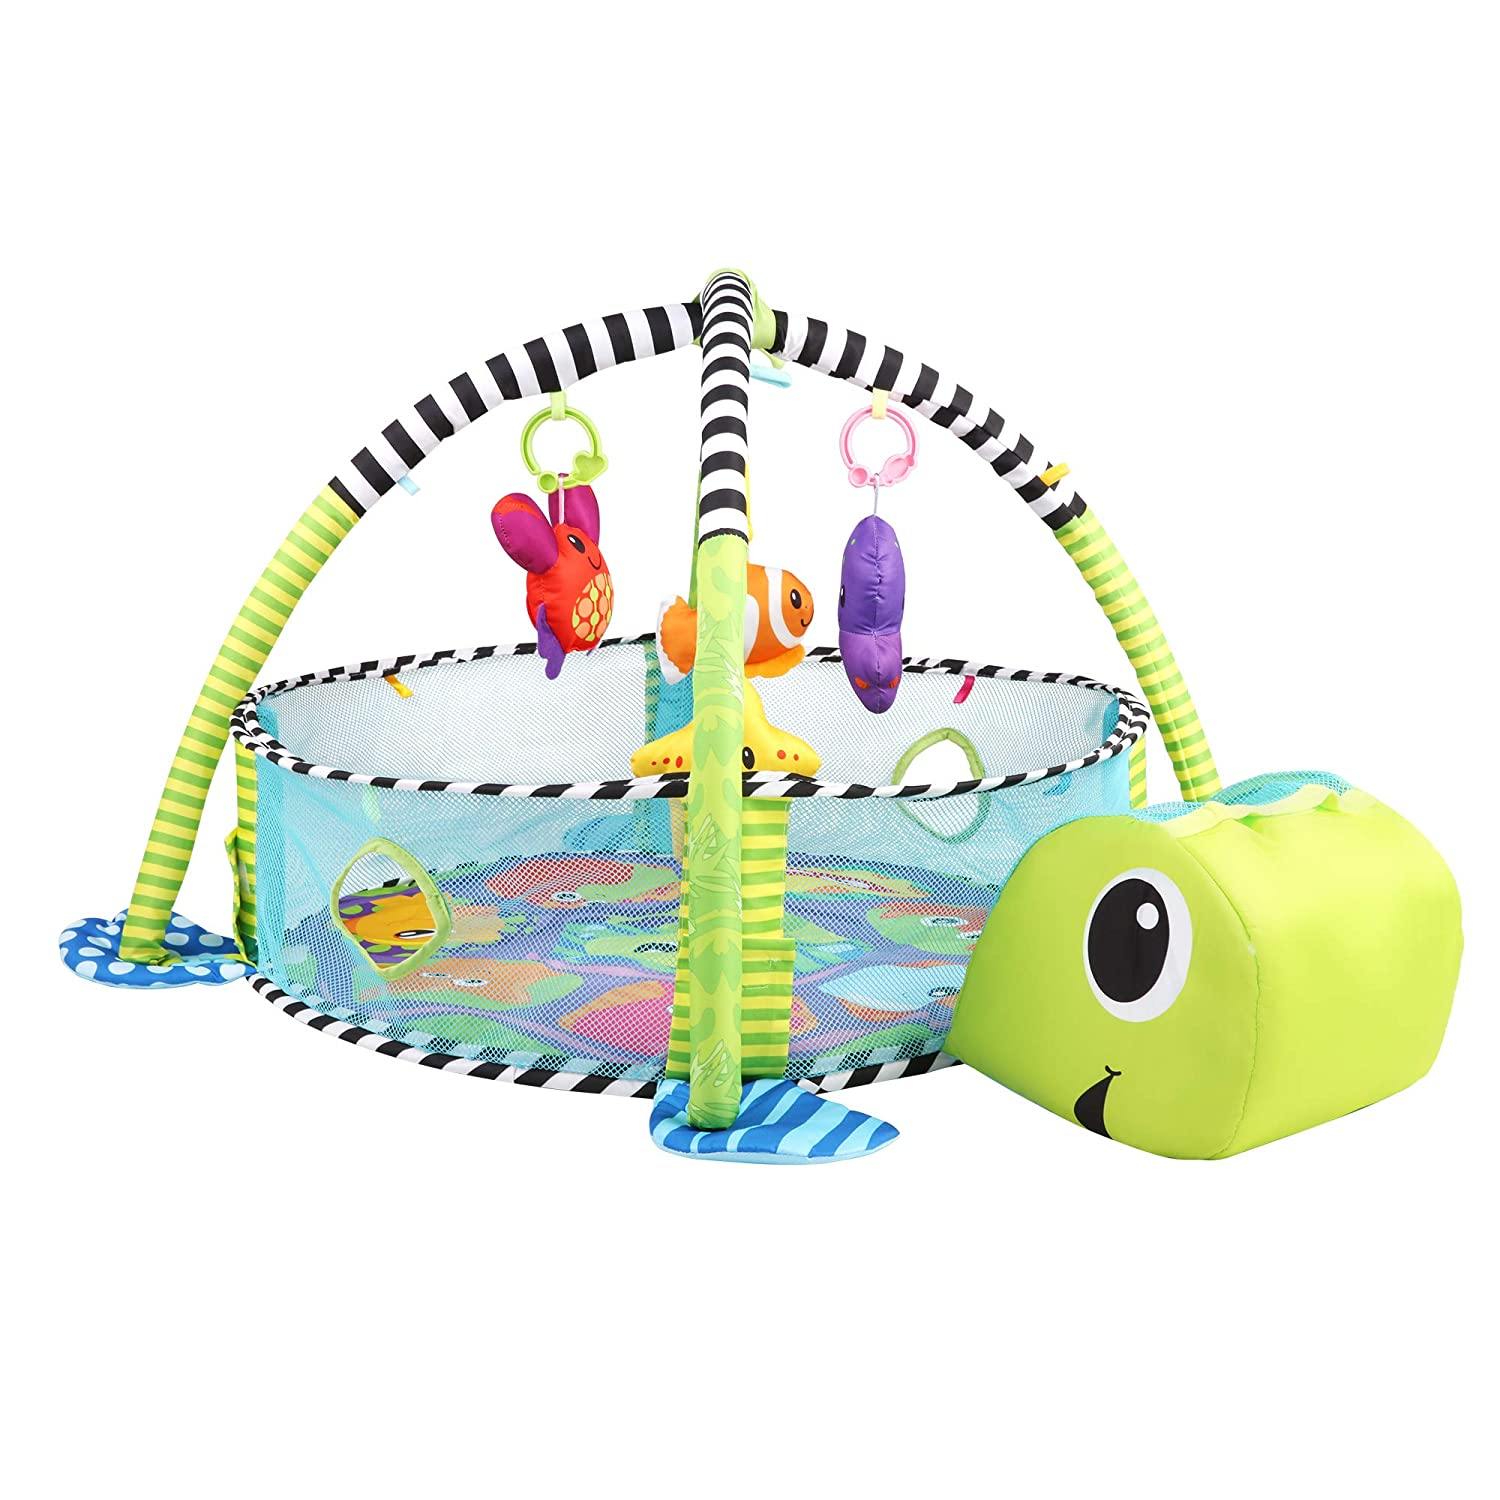 3-in-1 Cartoon Baby Infant Activity Gym Turtle Play mat & Ball Pit with 30 Balls & 4 Linkable Toys